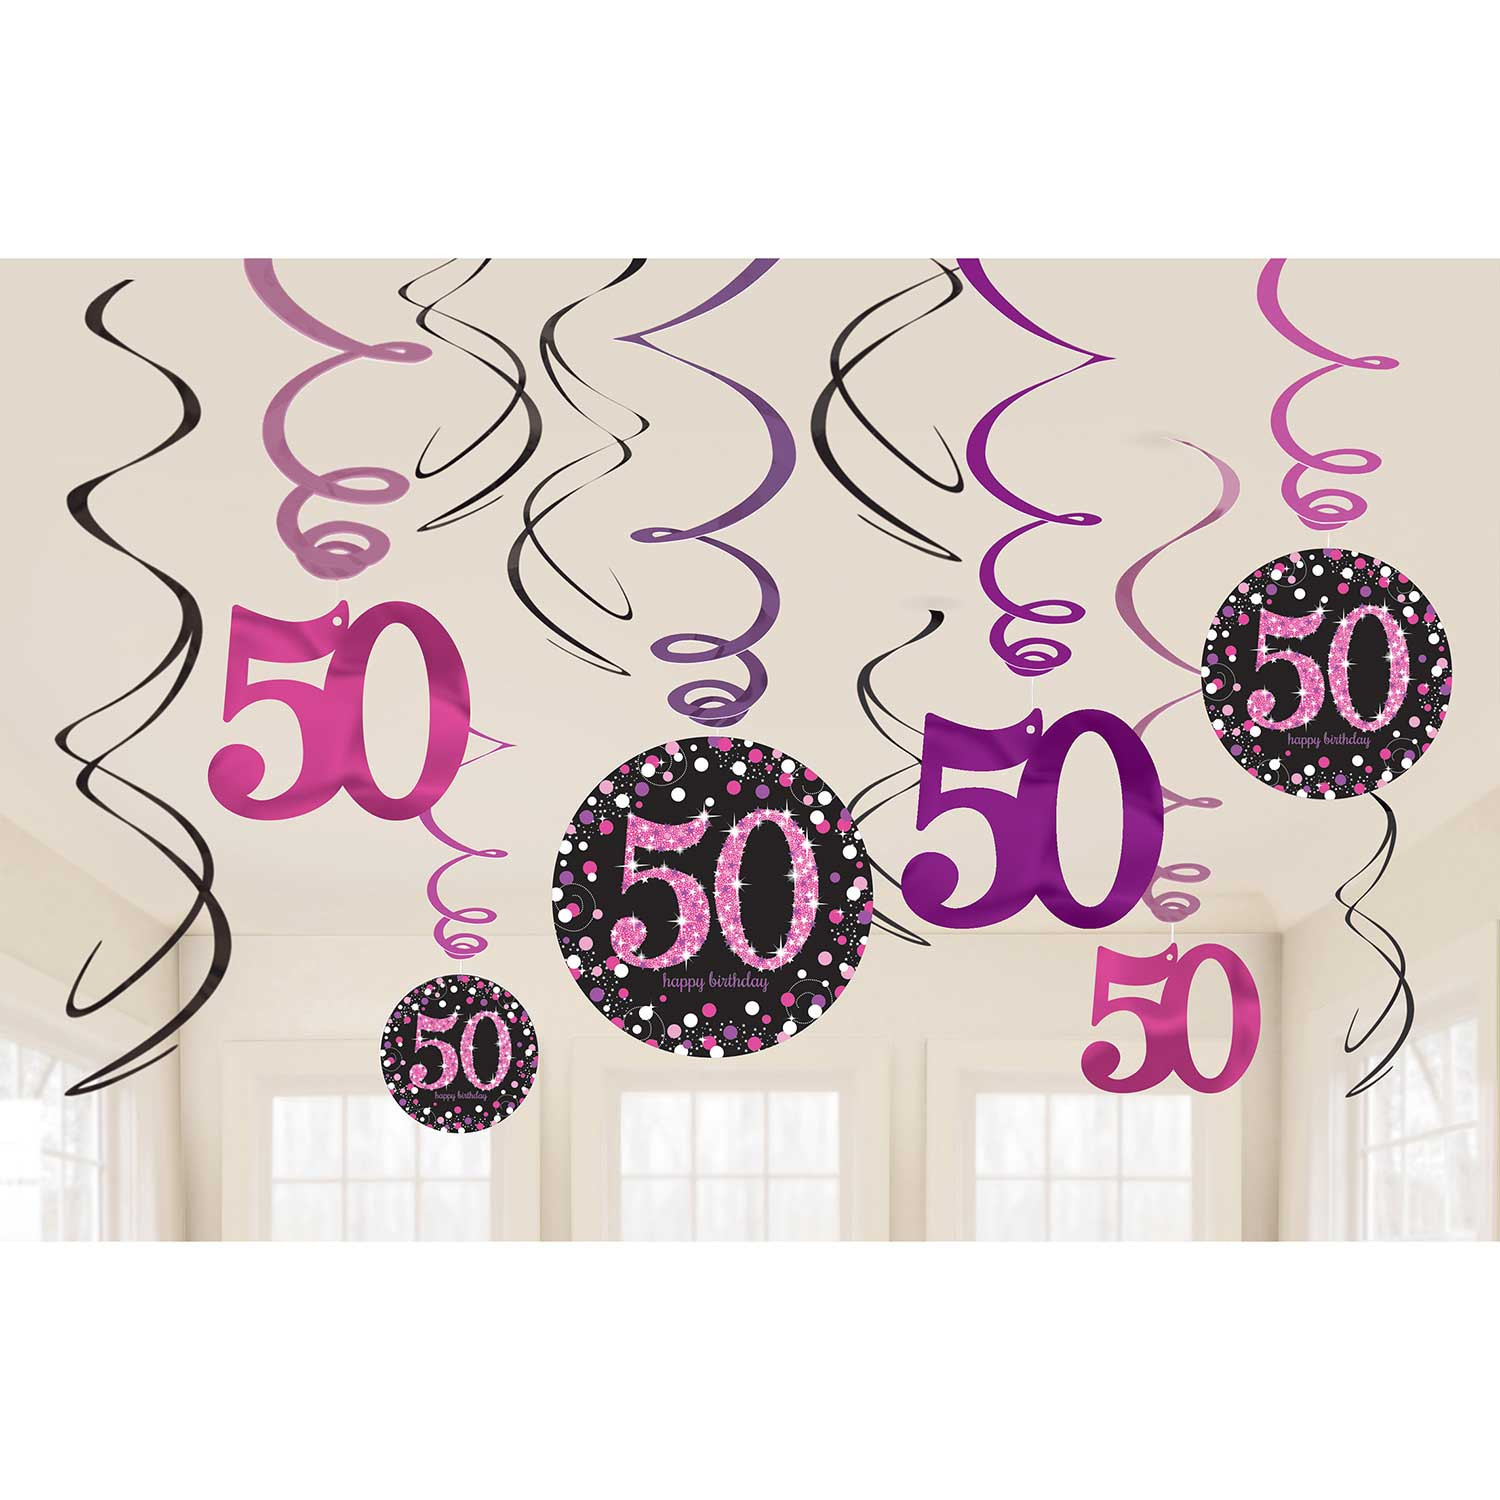 Amscan Pink Sparkling Celebration 50th Hanging Swirl Decorations RRP 5.54 CLEARANCE XL 2.99